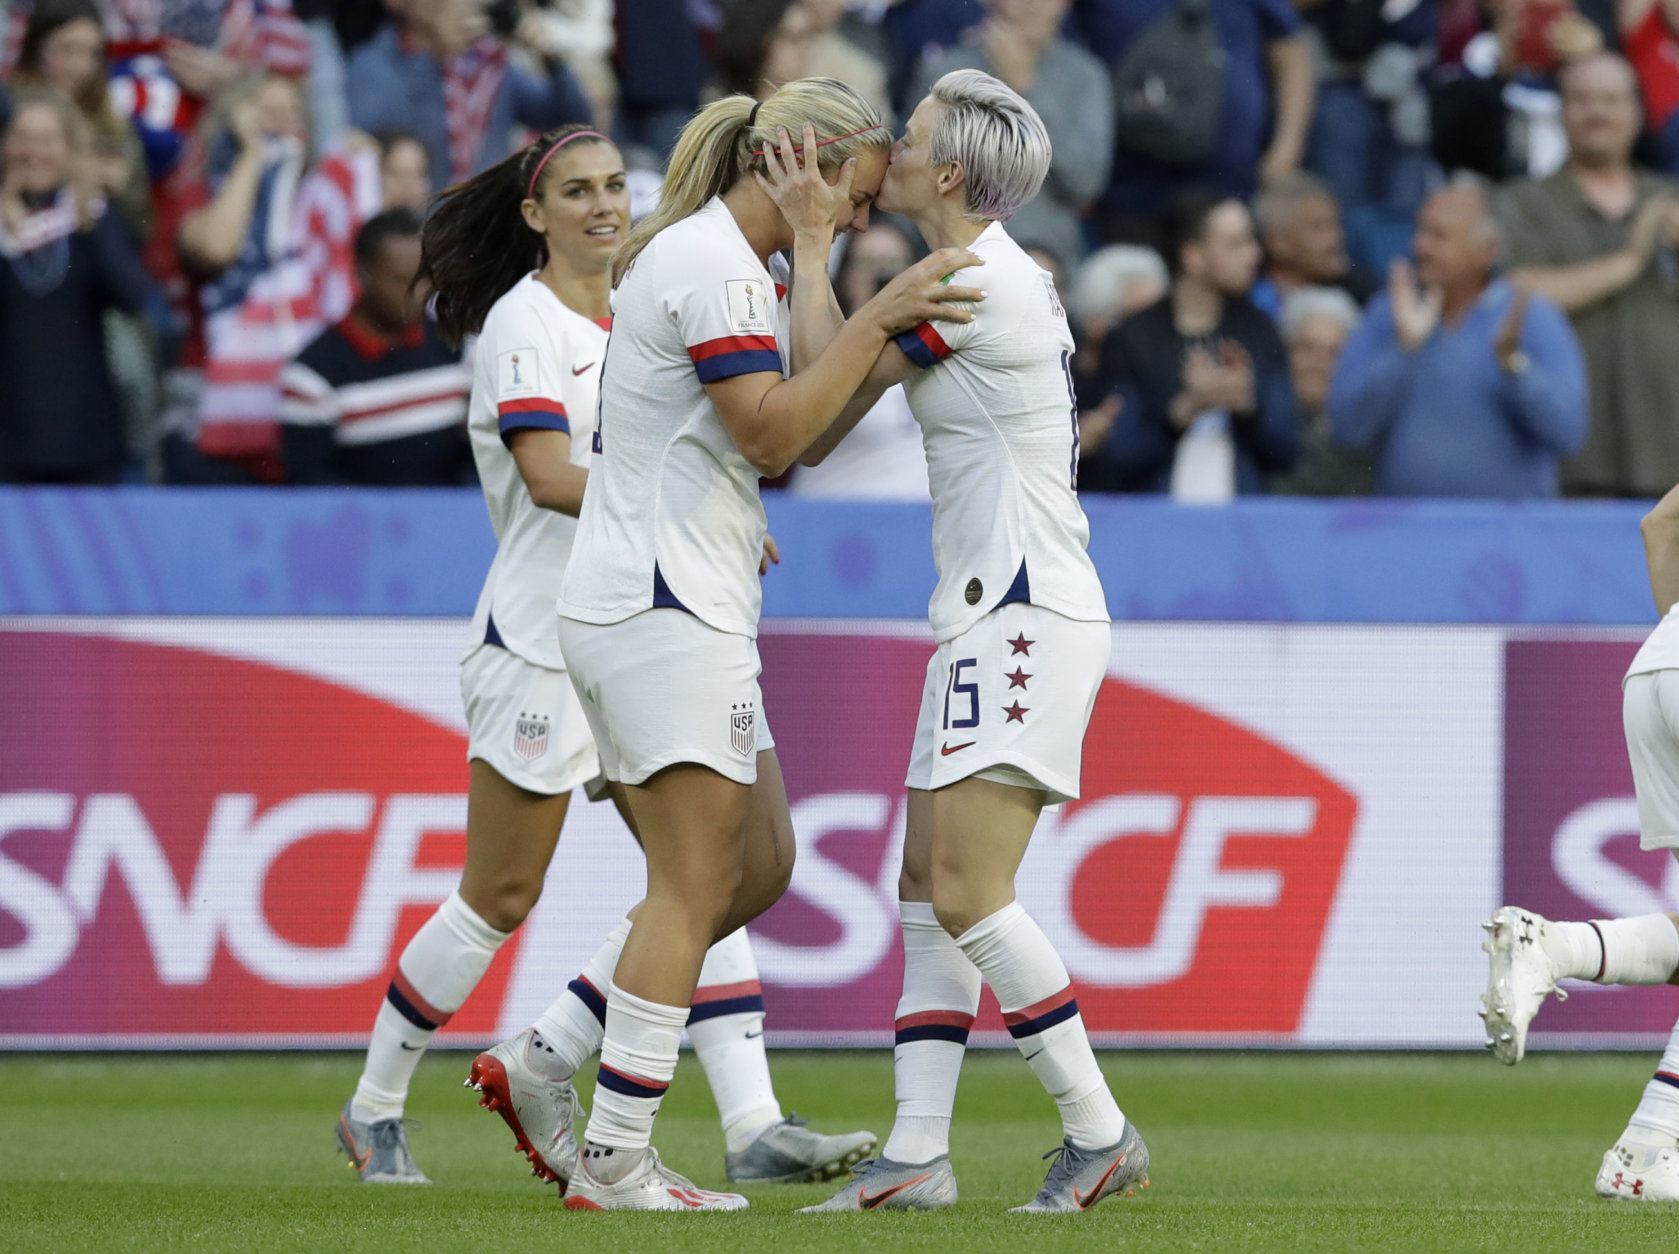 United States' Megan Rapinoe, right, kisses teammate and goal scorer Lindsey Horan during the Women's World Cup Group F soccer match between Sweden and the United States at Stade Océane, in Le Havre, France, Thursday, June 20, 2019. (AP Photo/Alessandra Tarantino)